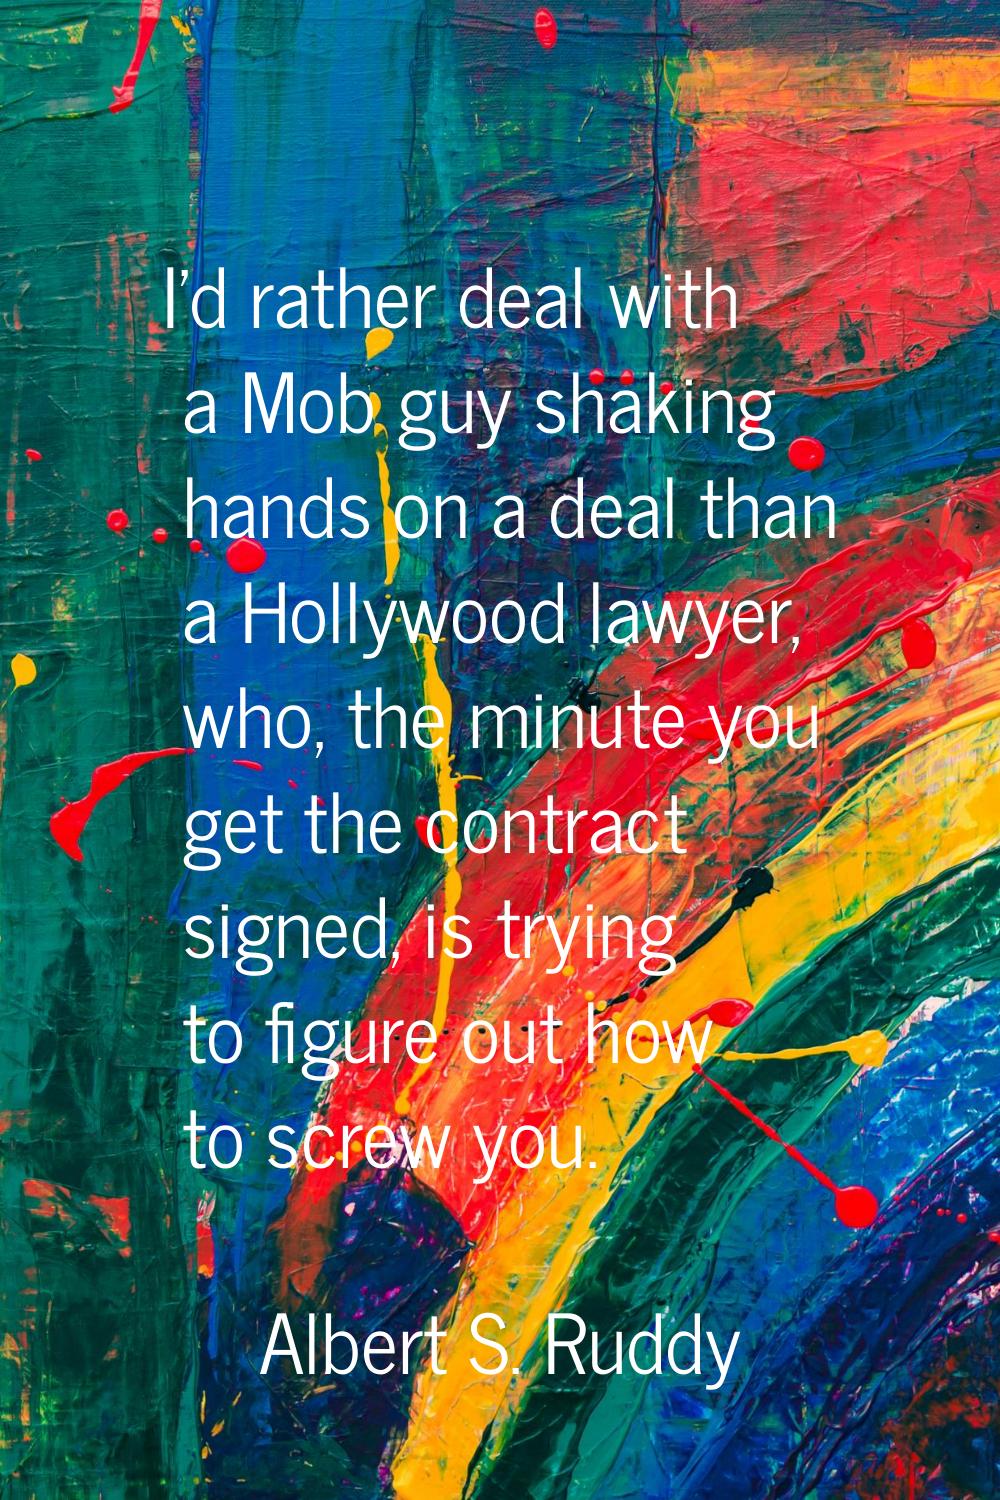 I'd rather deal with a Mob guy shaking hands on a deal than a Hollywood lawyer, who, the minute you